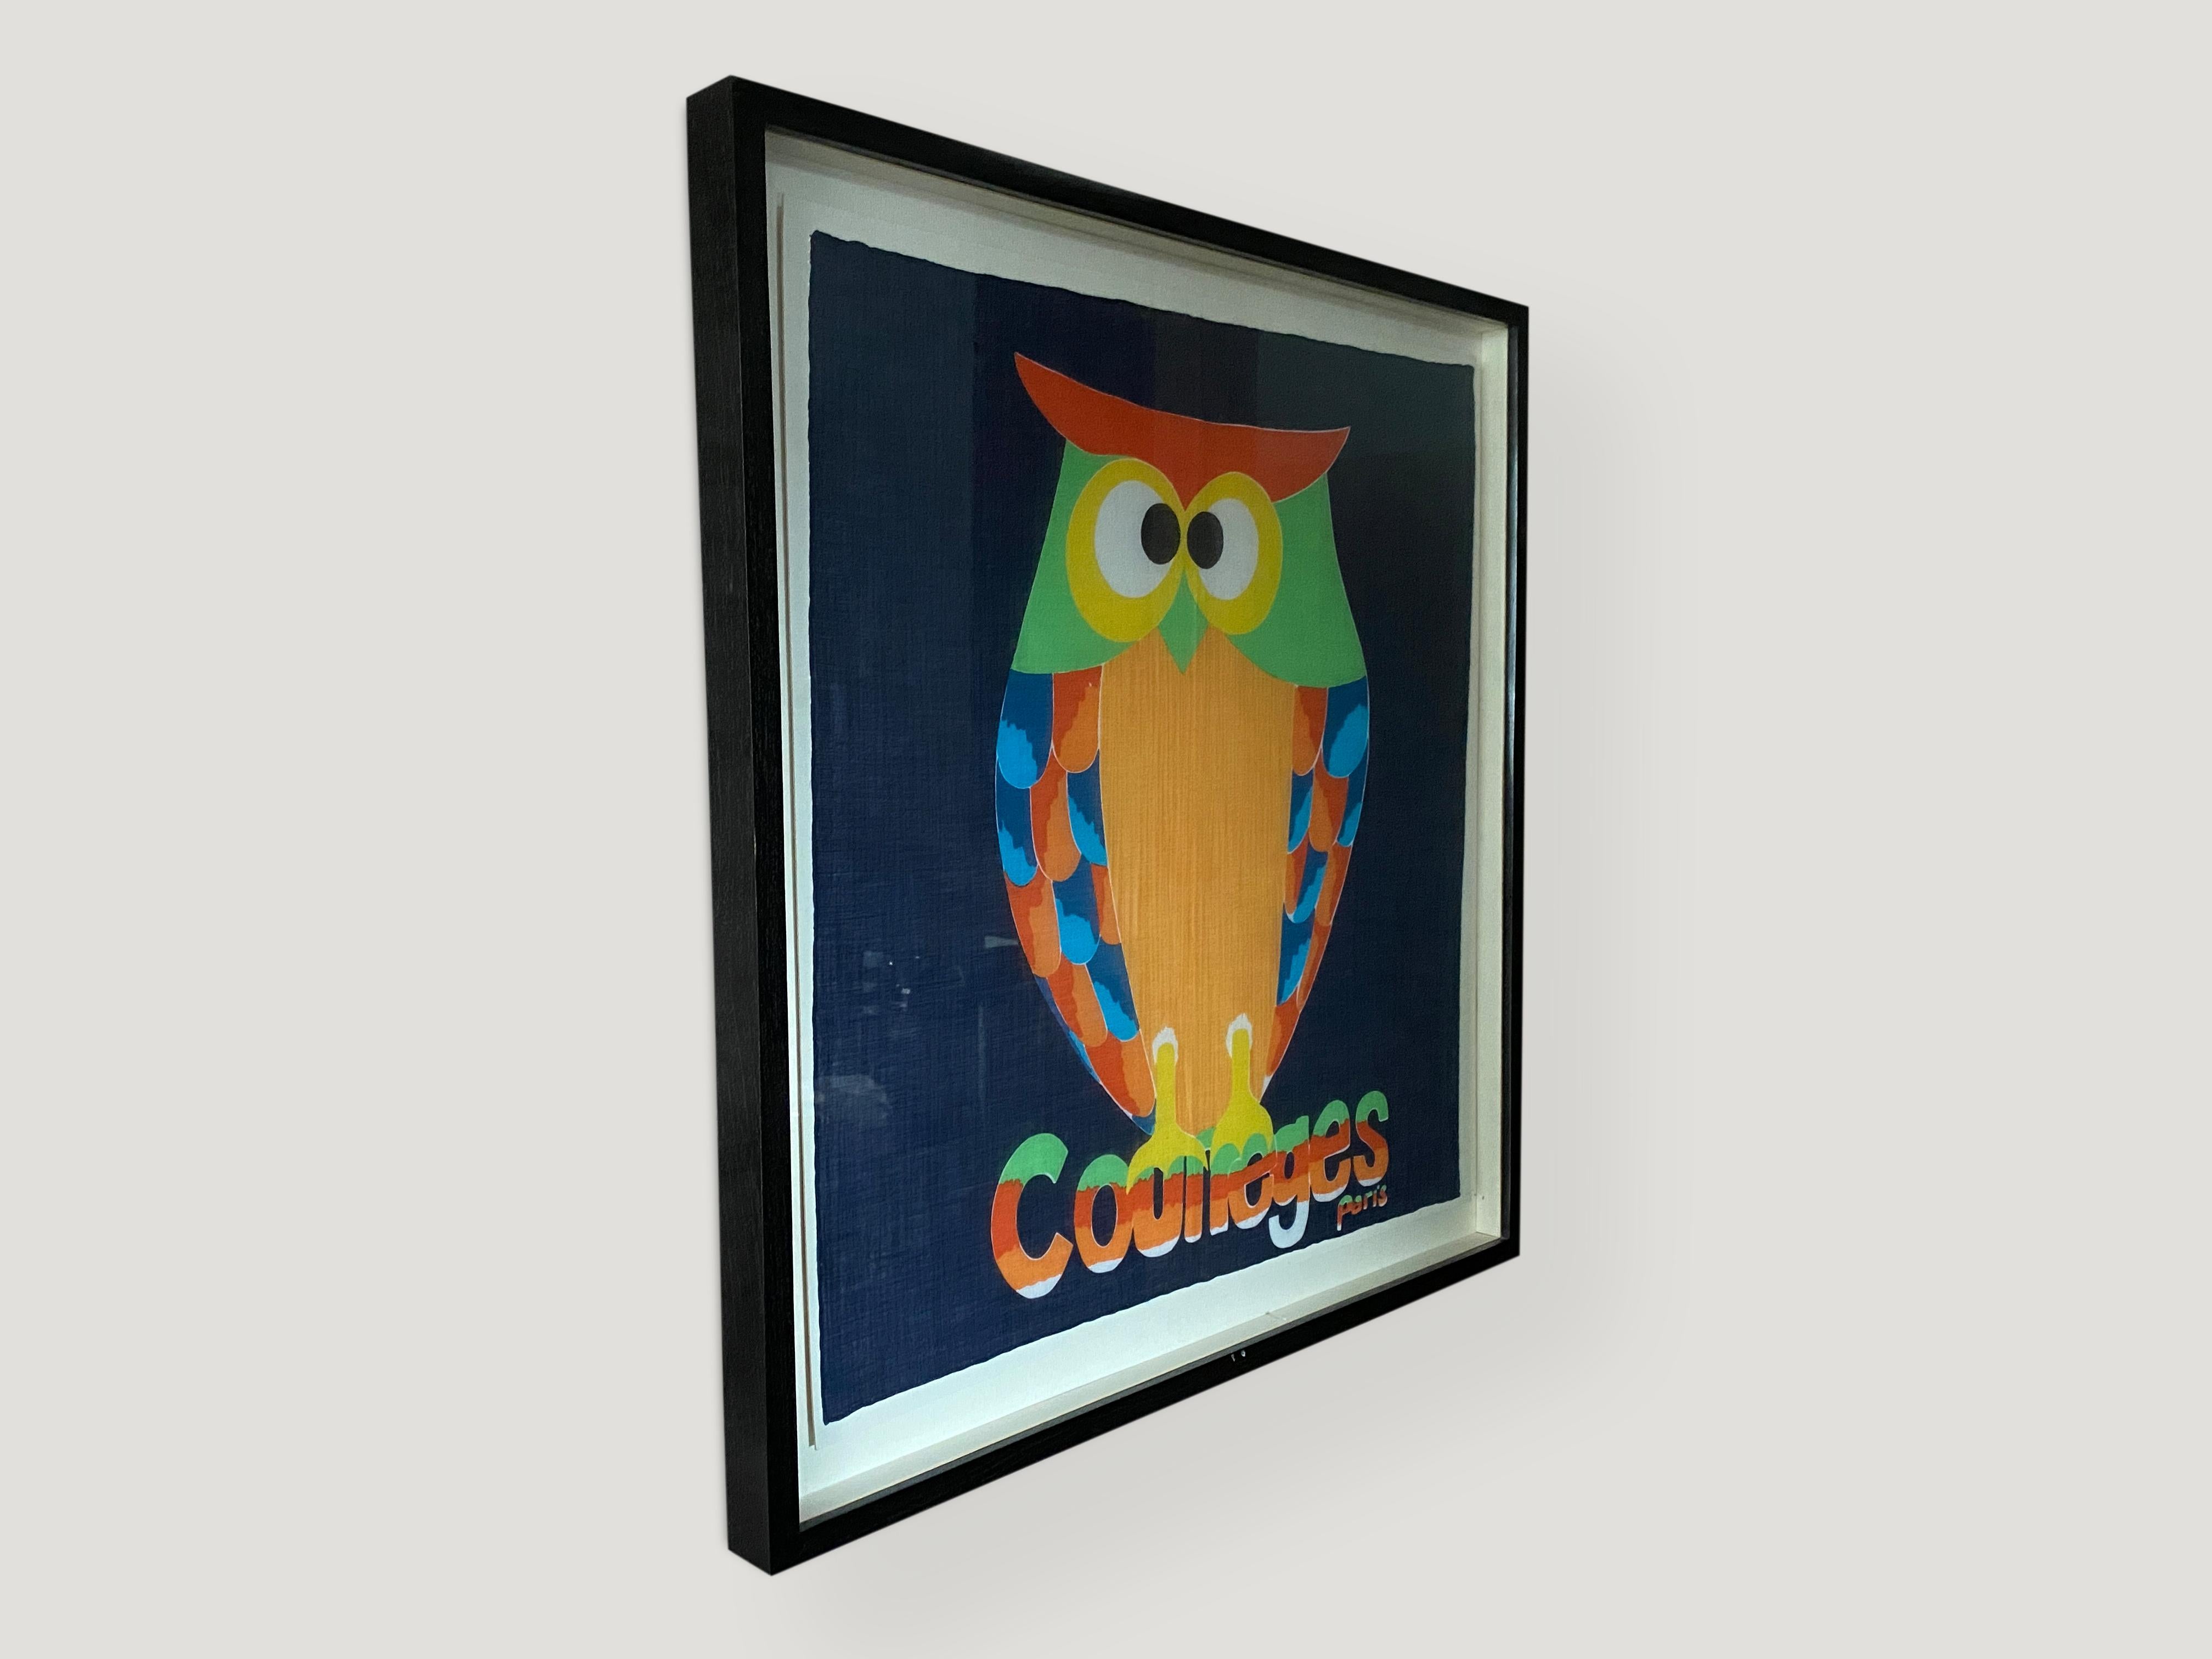 Rare, vintage Courrèges cotton scarf in excellent condition found in Paris, France. Features bold pop-art style owl sitting on the Courrèges Paris logo. Set in a modern espresso teak box frame.
Andrianna Shamaris. The Leader In Modern Organic